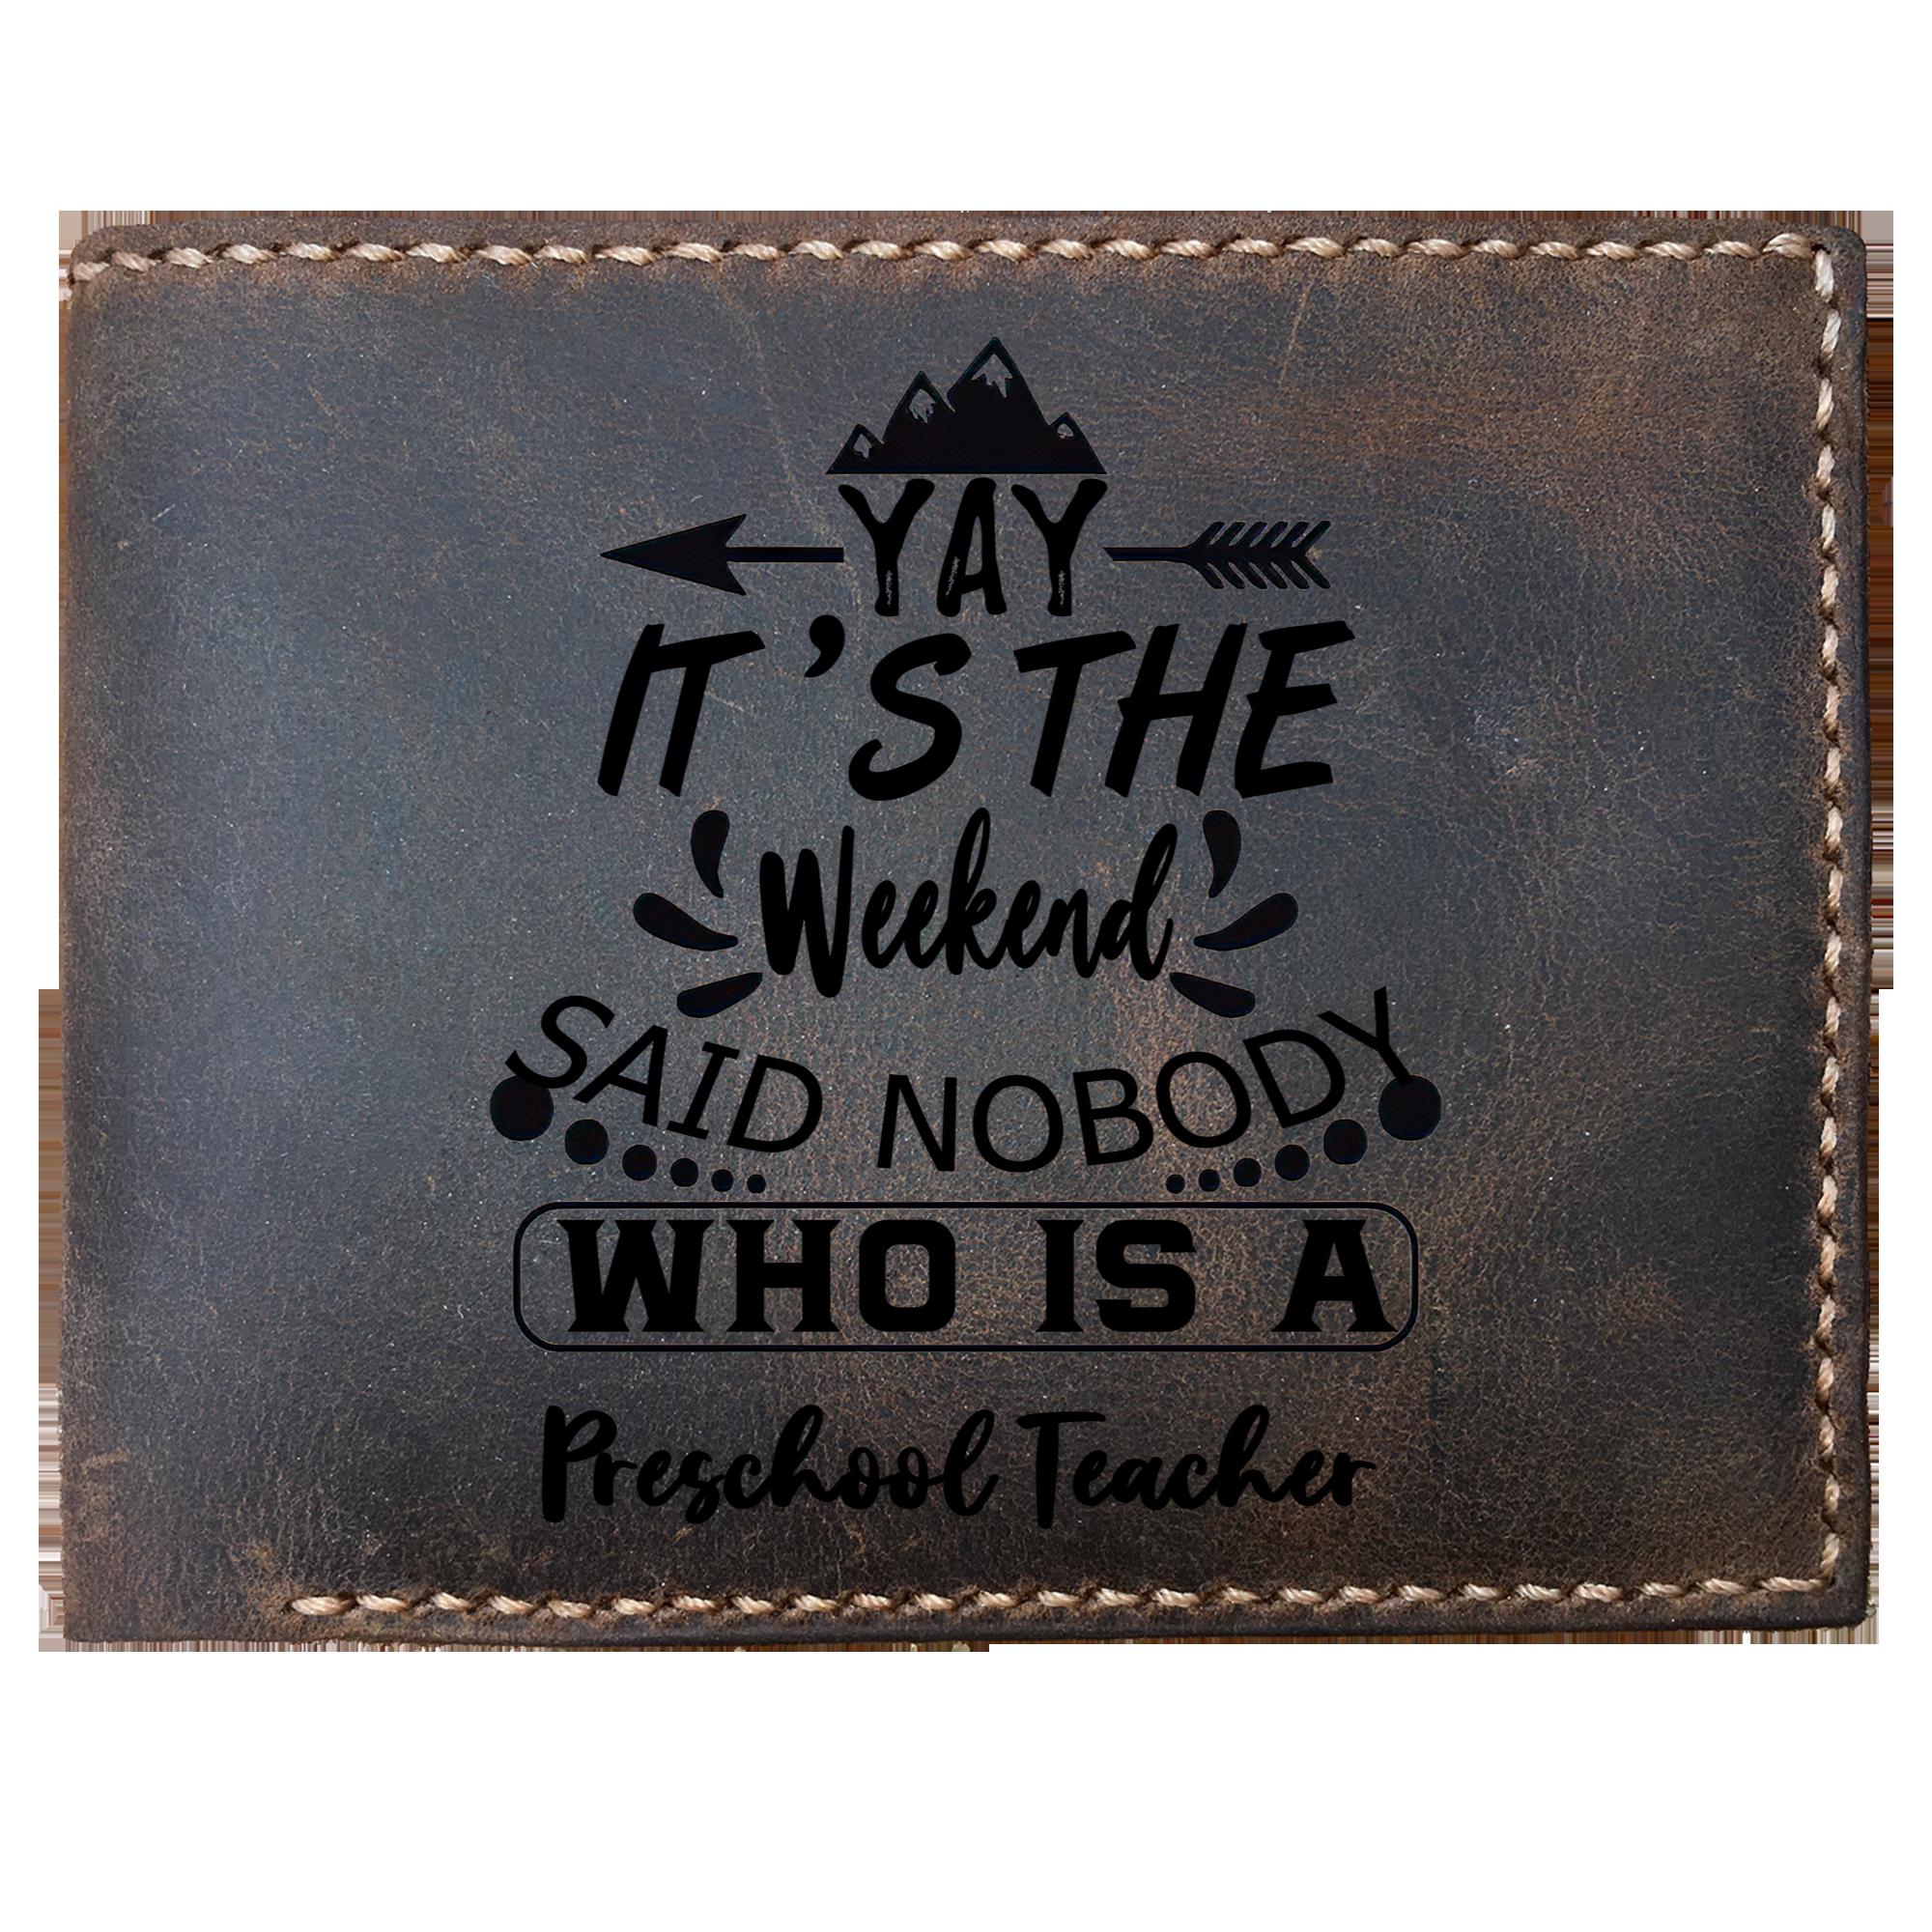 Skitongifts Funny Custom Laser Engraved Bifold Leather Wallet For Men, It's The Weekend Said Nobody Who Is A Preschool Teacher, Father's Day Gifts